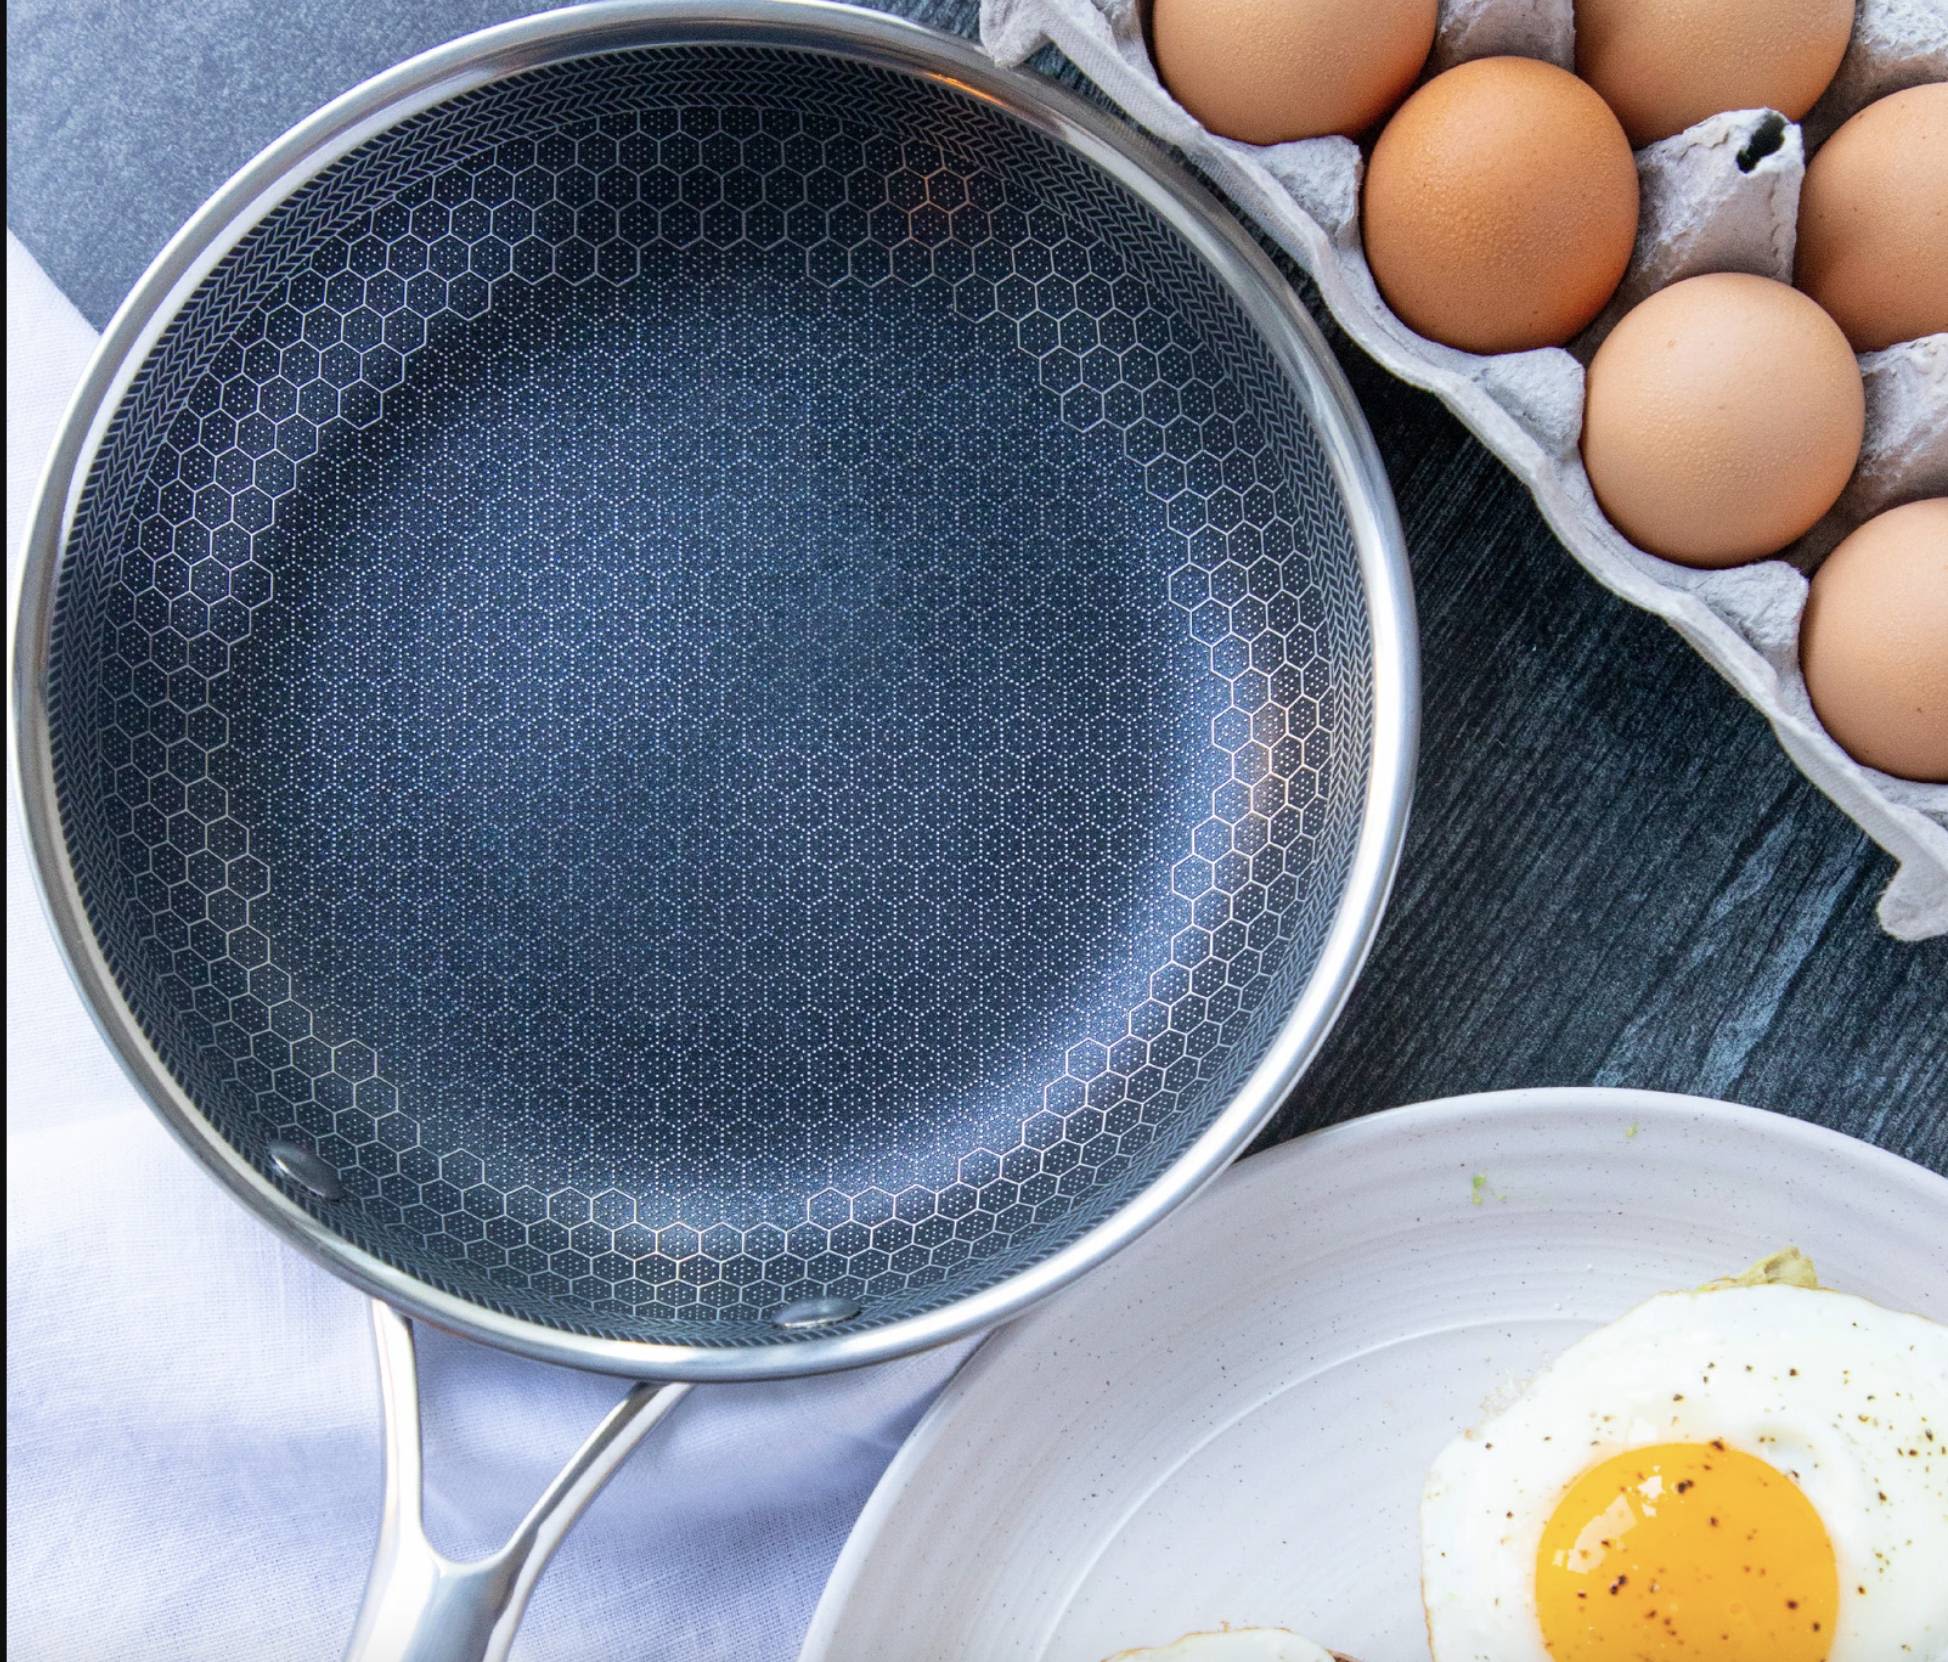 Can the non-stick pan coating come off ?